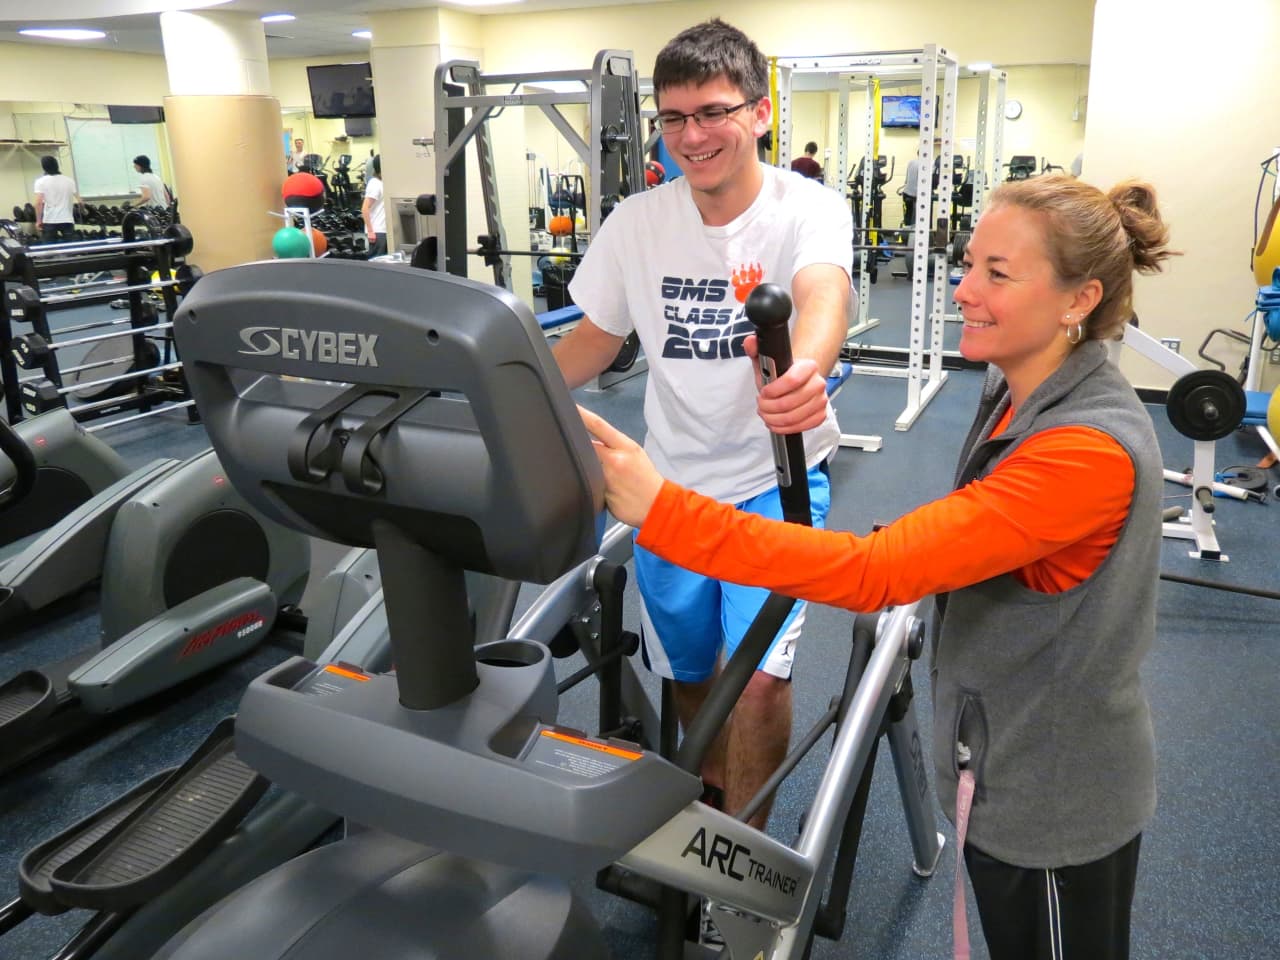 The new arc trainer in Briarcliff High Schools fitness center is offering students a new type of workout. 